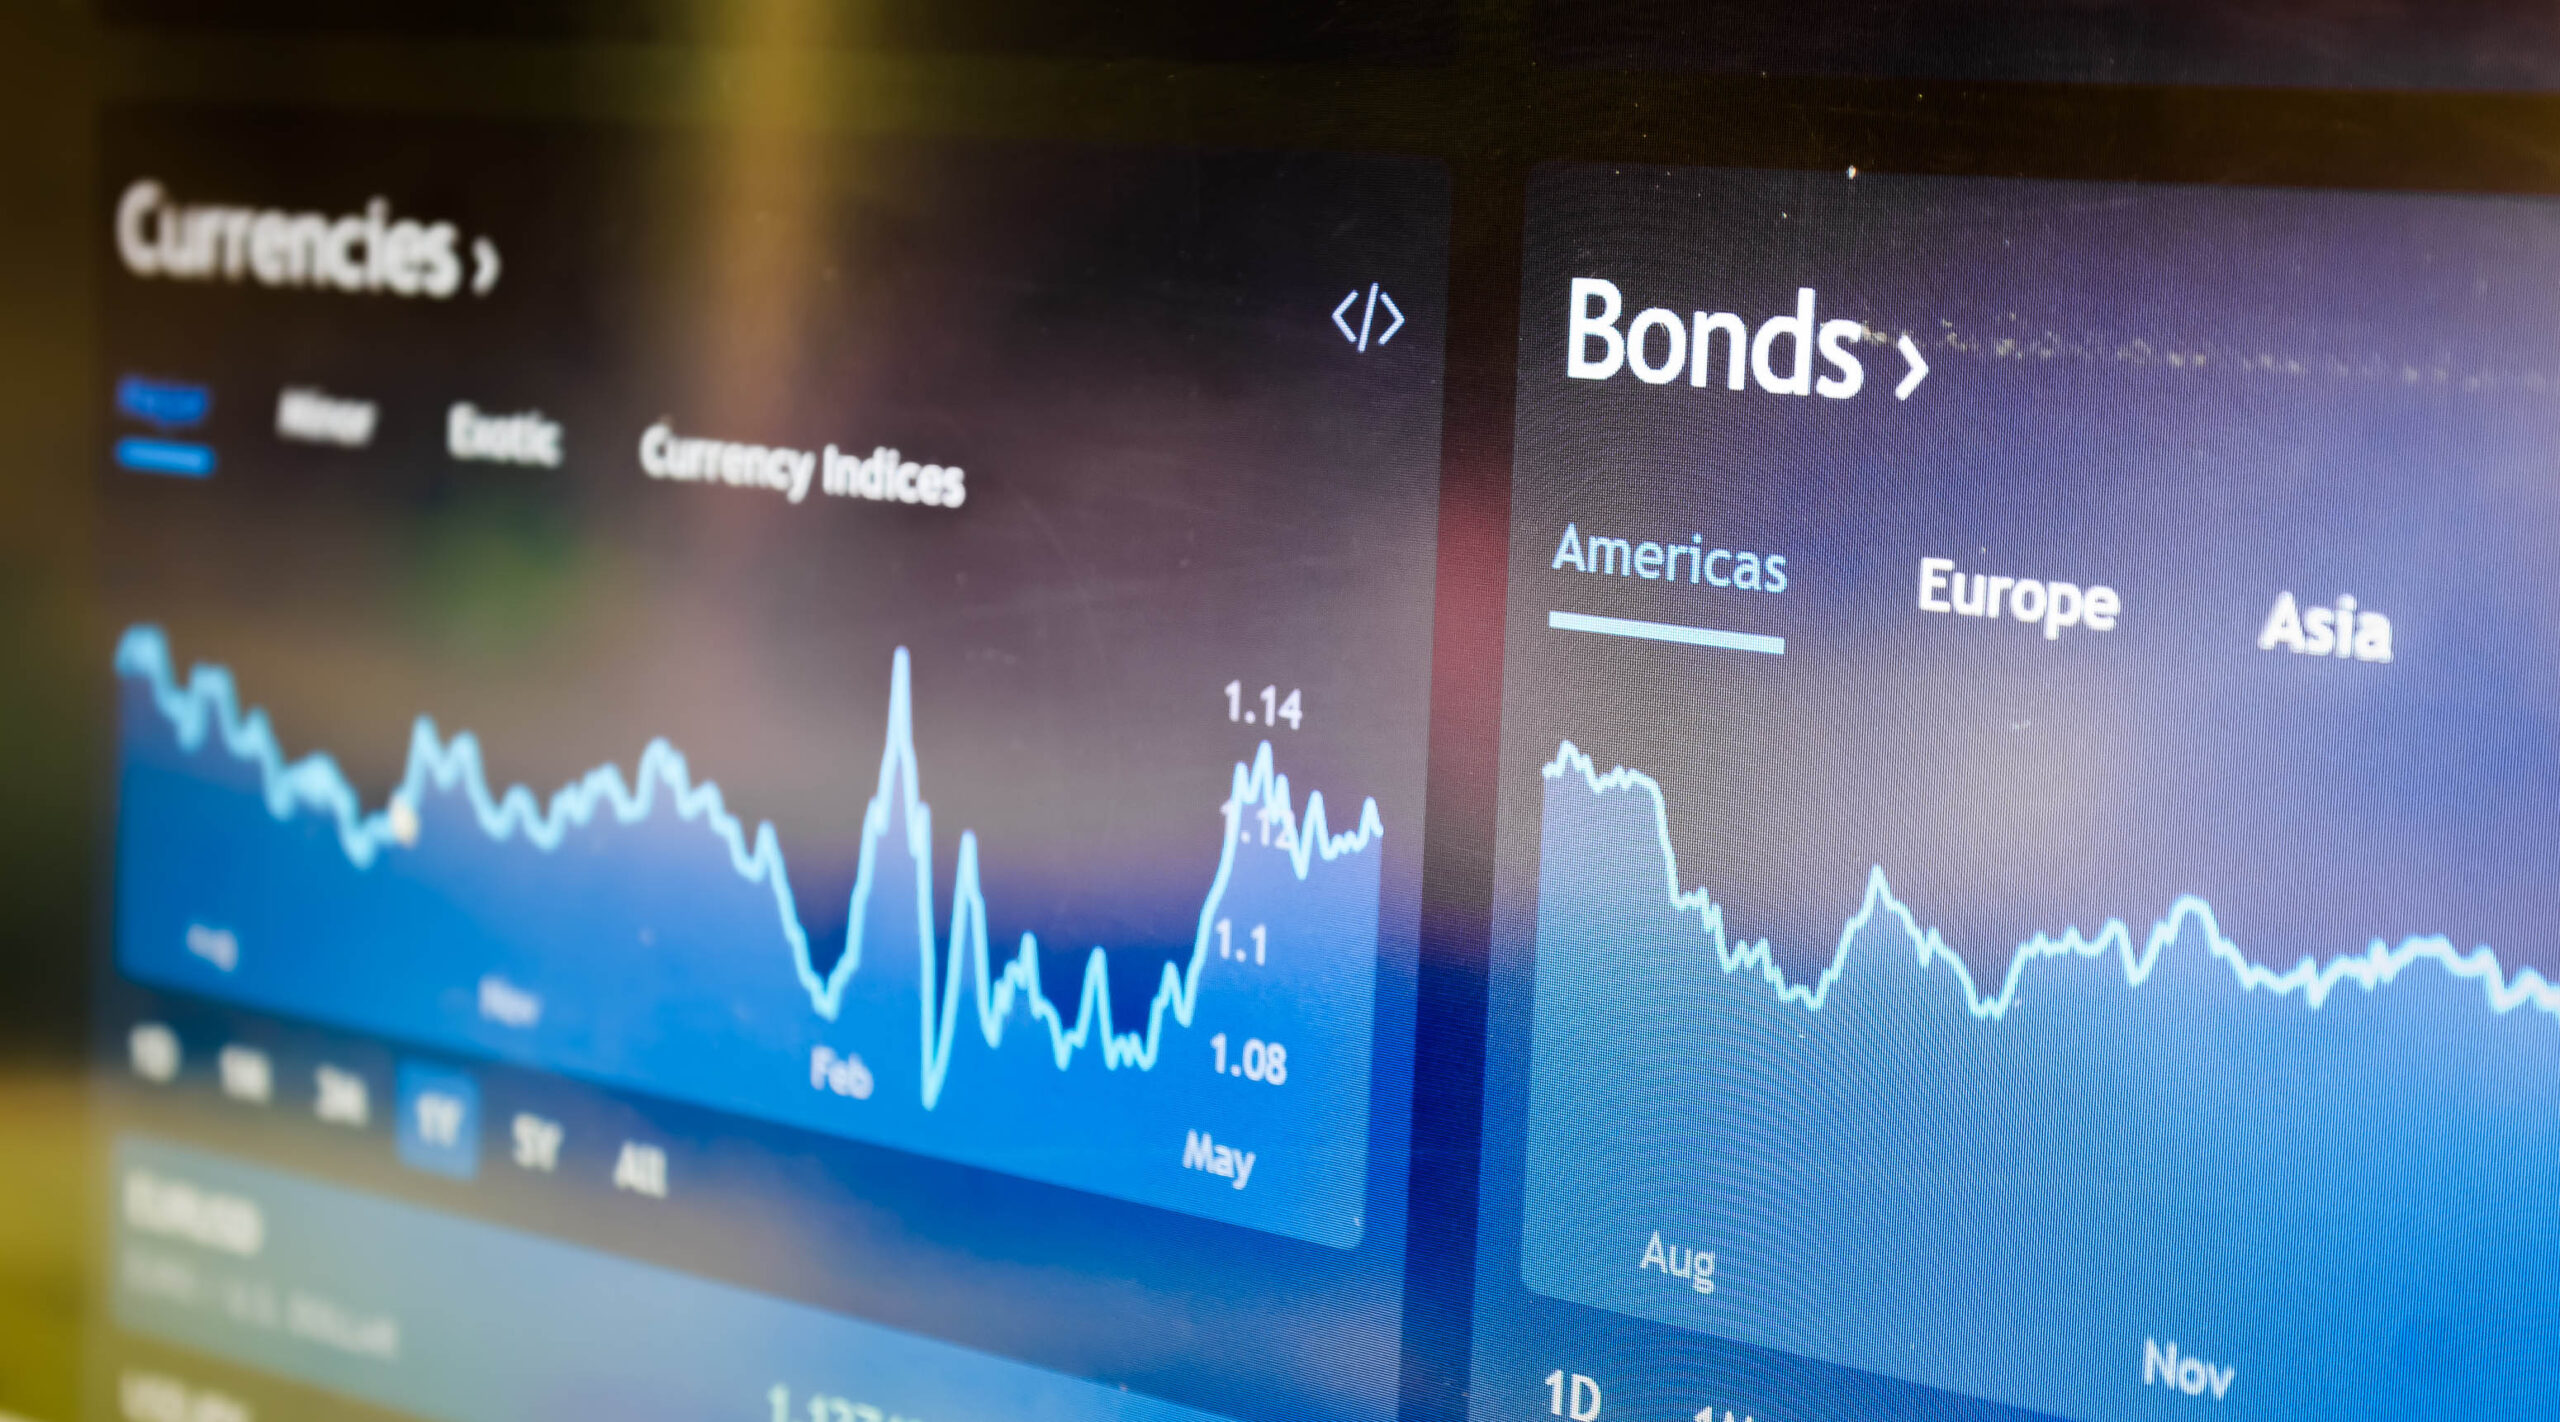 Picture of American bonds on stock market perspective dashboard.